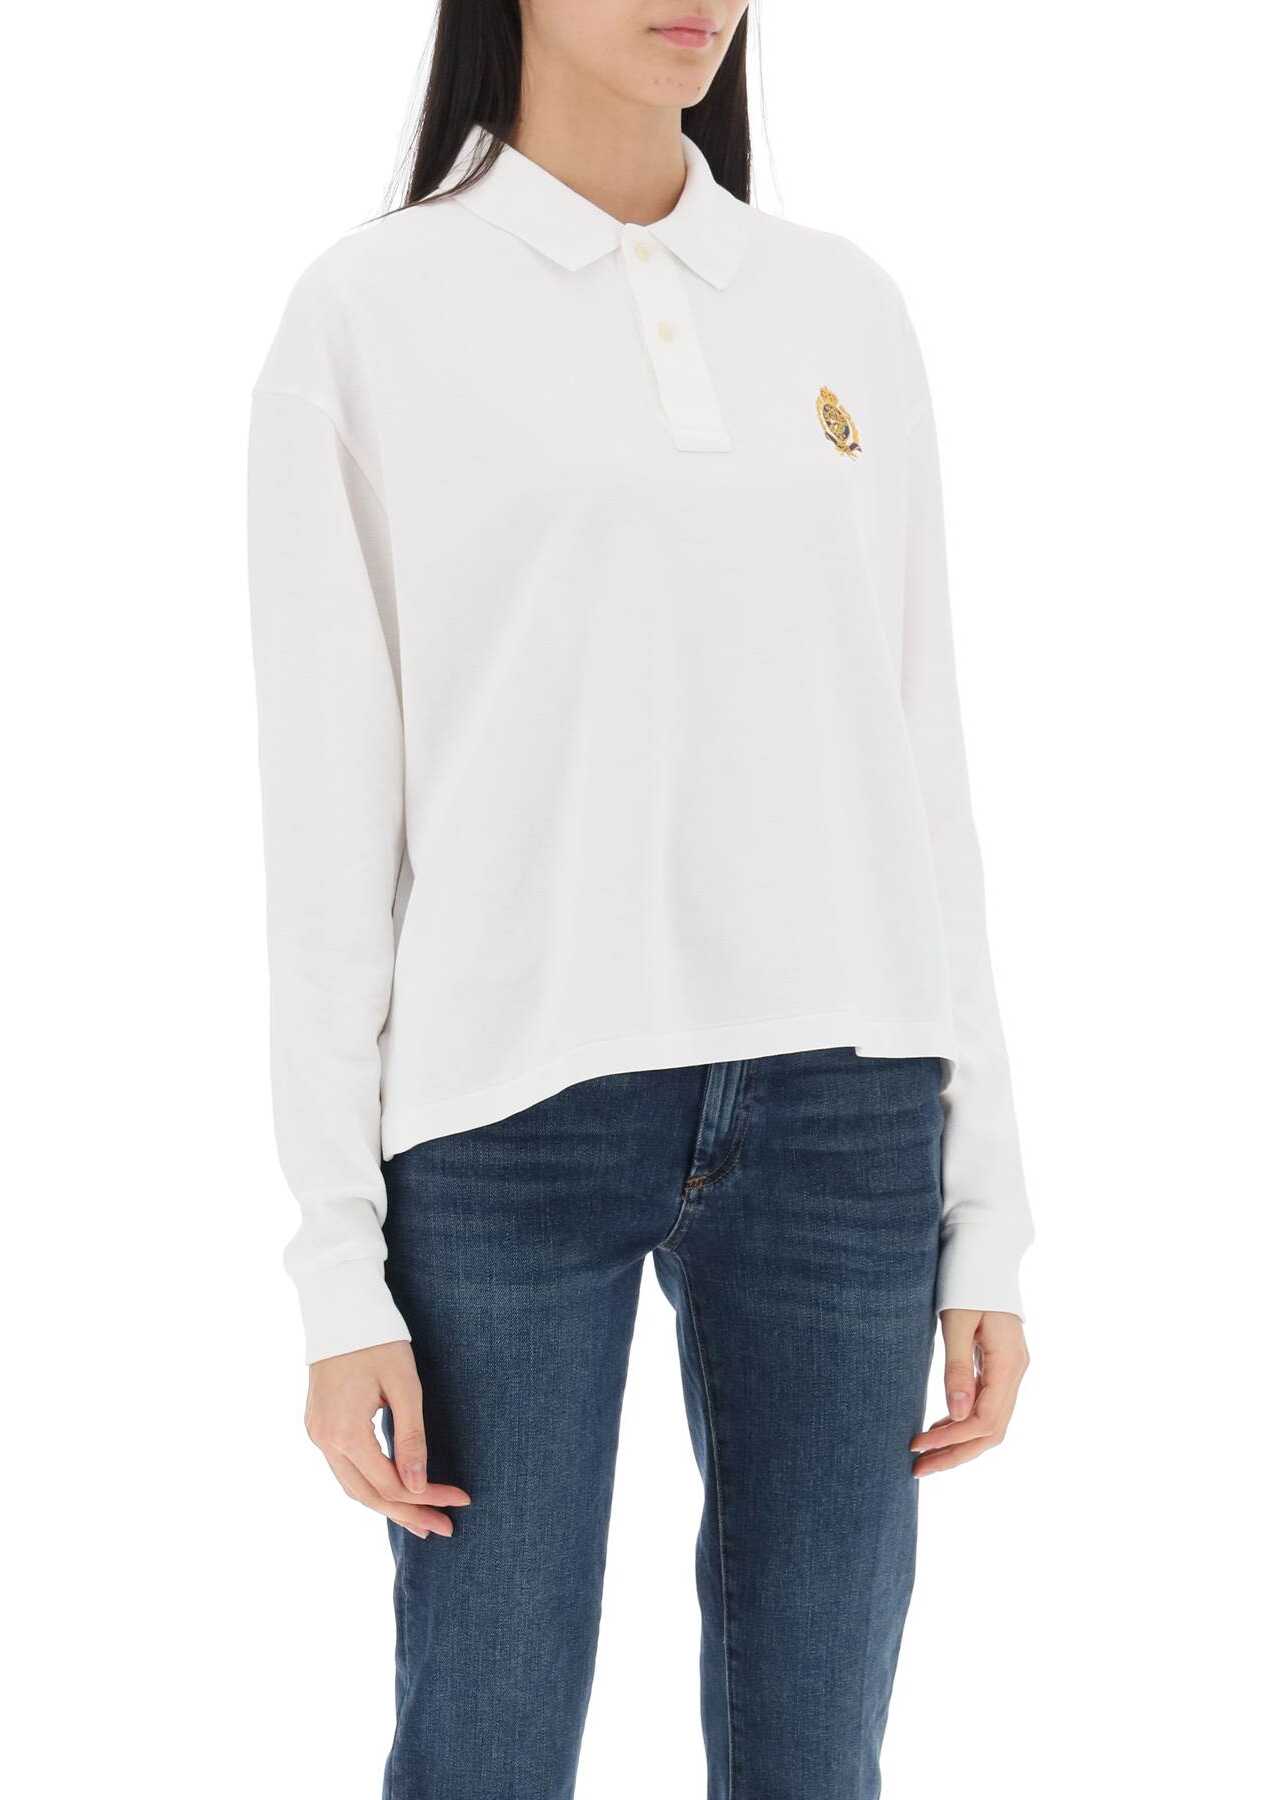 Ralph Lauren Long-Sleeved Polo Shirt With Embroidered Crest WHITE